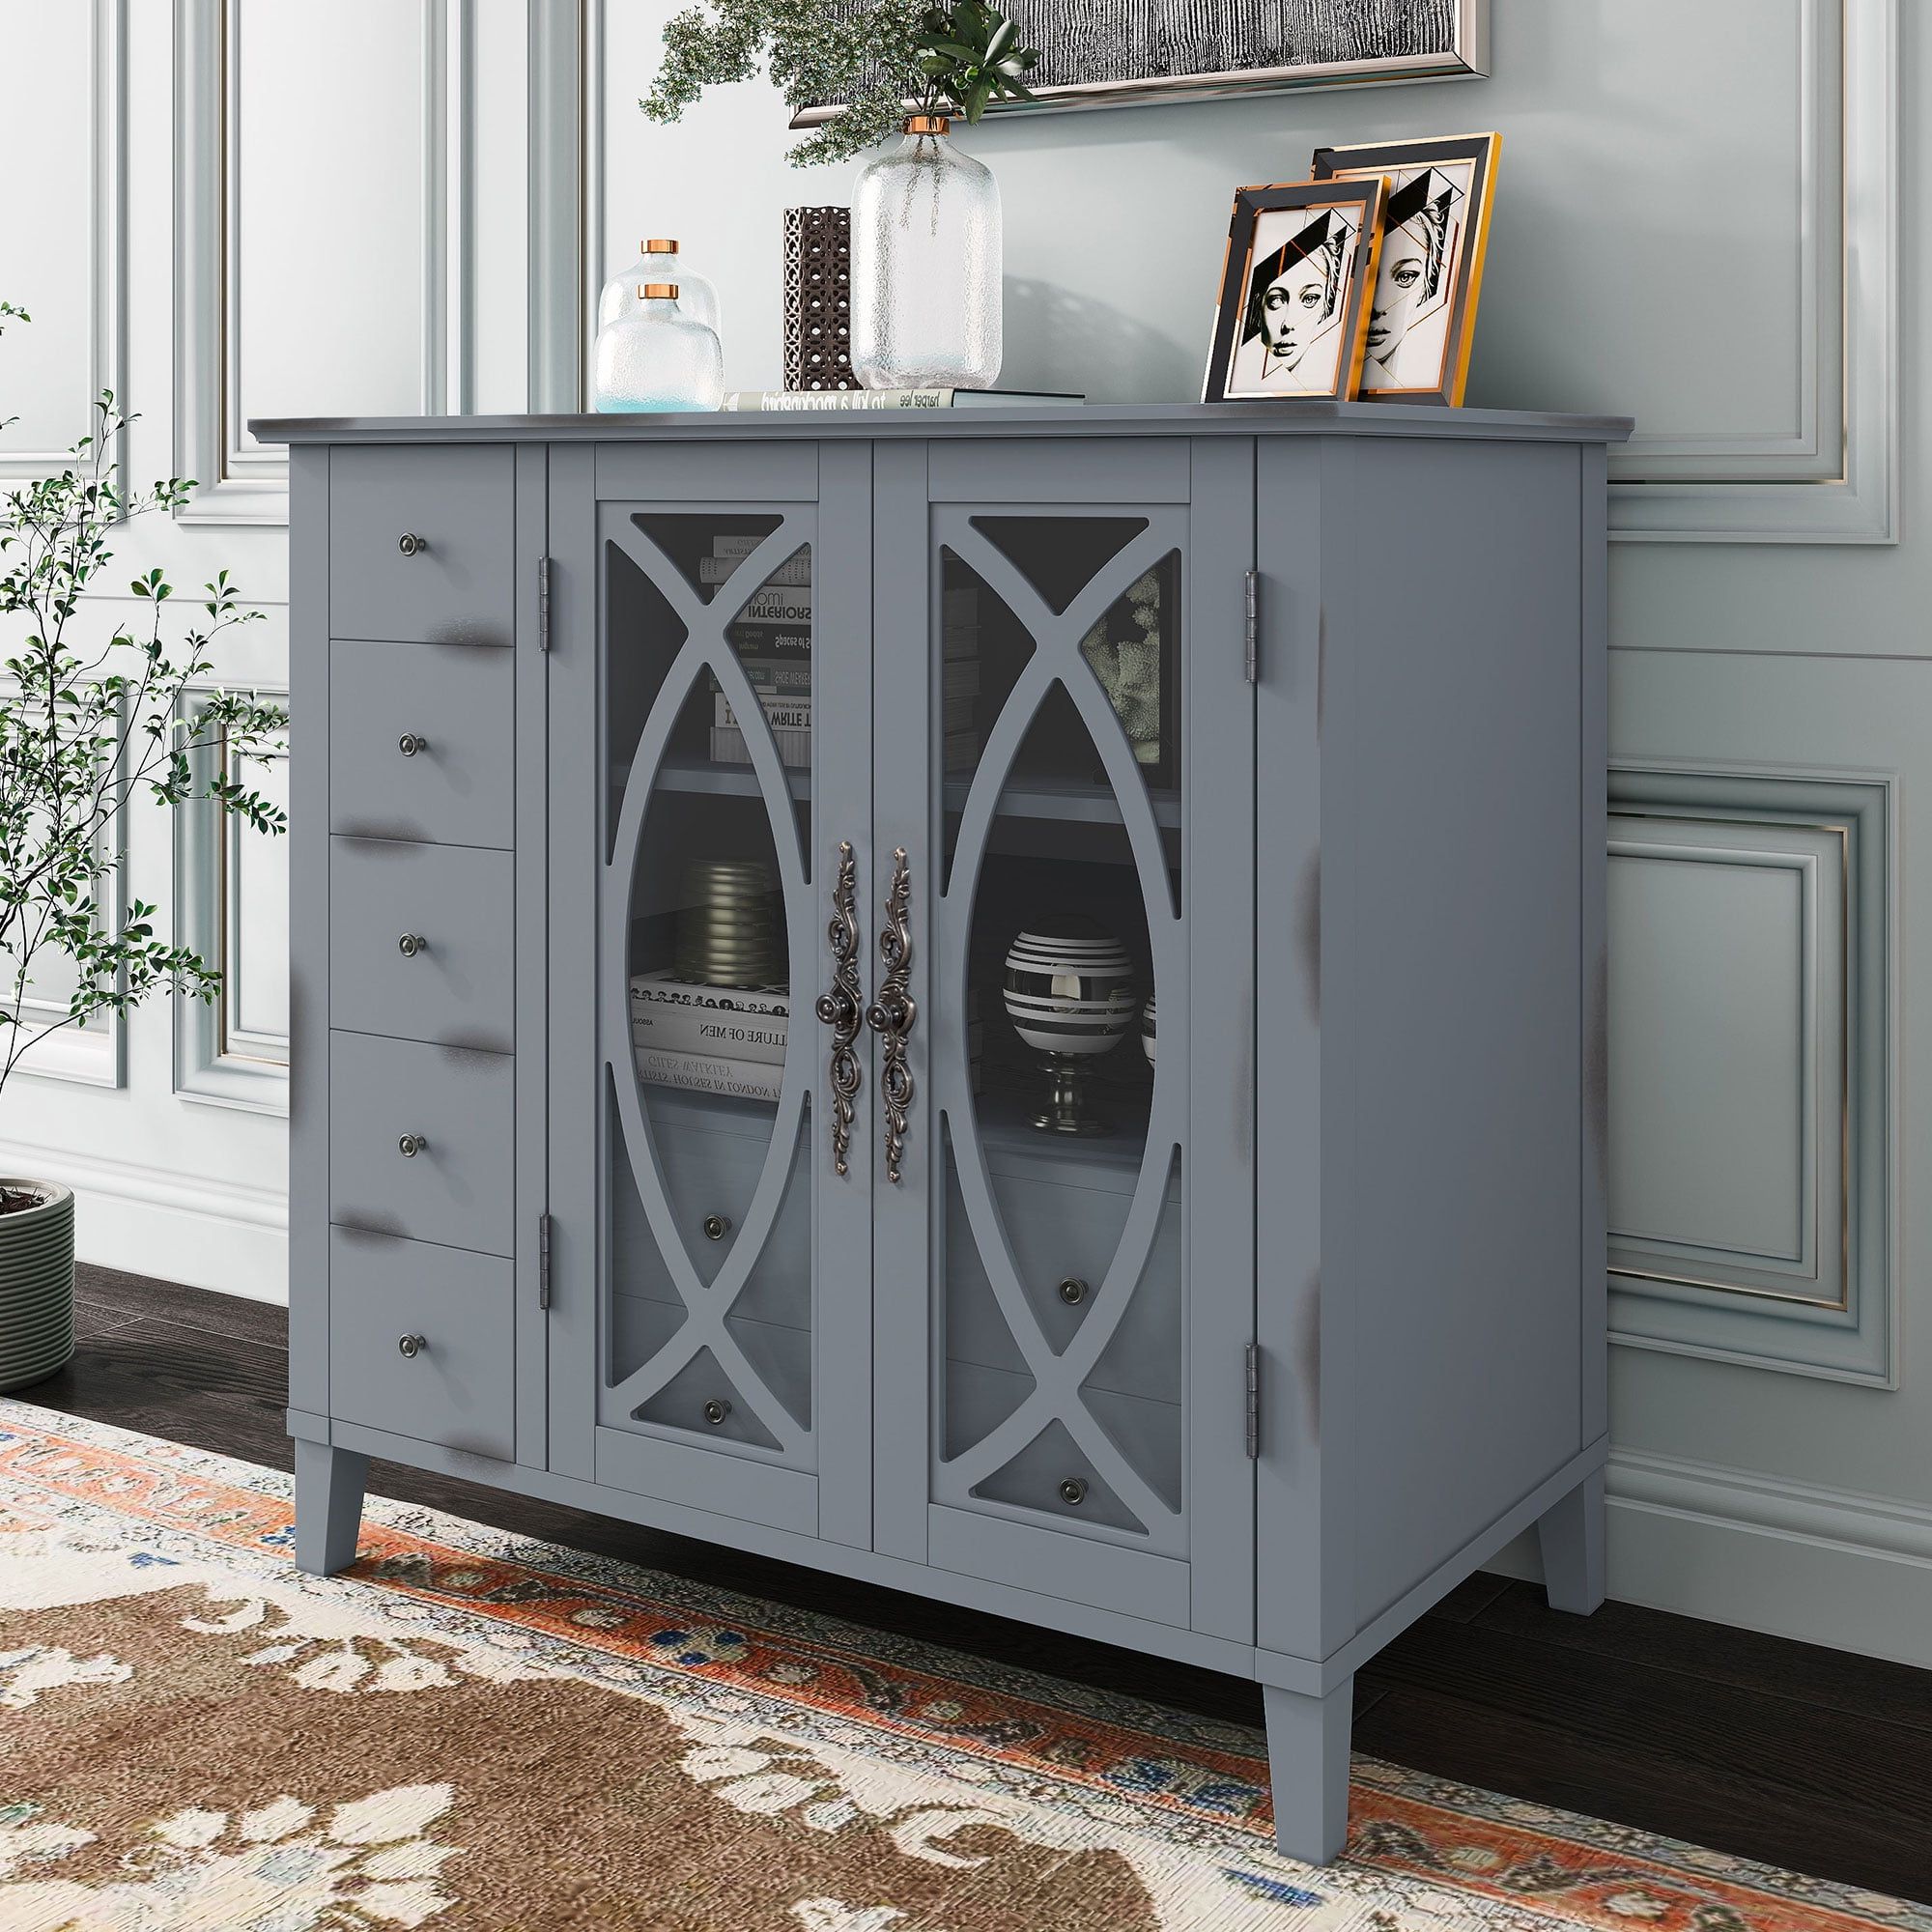 Wooden Accent Storage Cabinet Buffets & Sideboards With Adjustable Shelf,  Modern Sideboard, Wooden Cabinet With 7 Drawers, For Entryway, Living Room,  Bedroom, Antique Navy Blue – Walmart For 4 Door Sideboards (View 15 of 20)